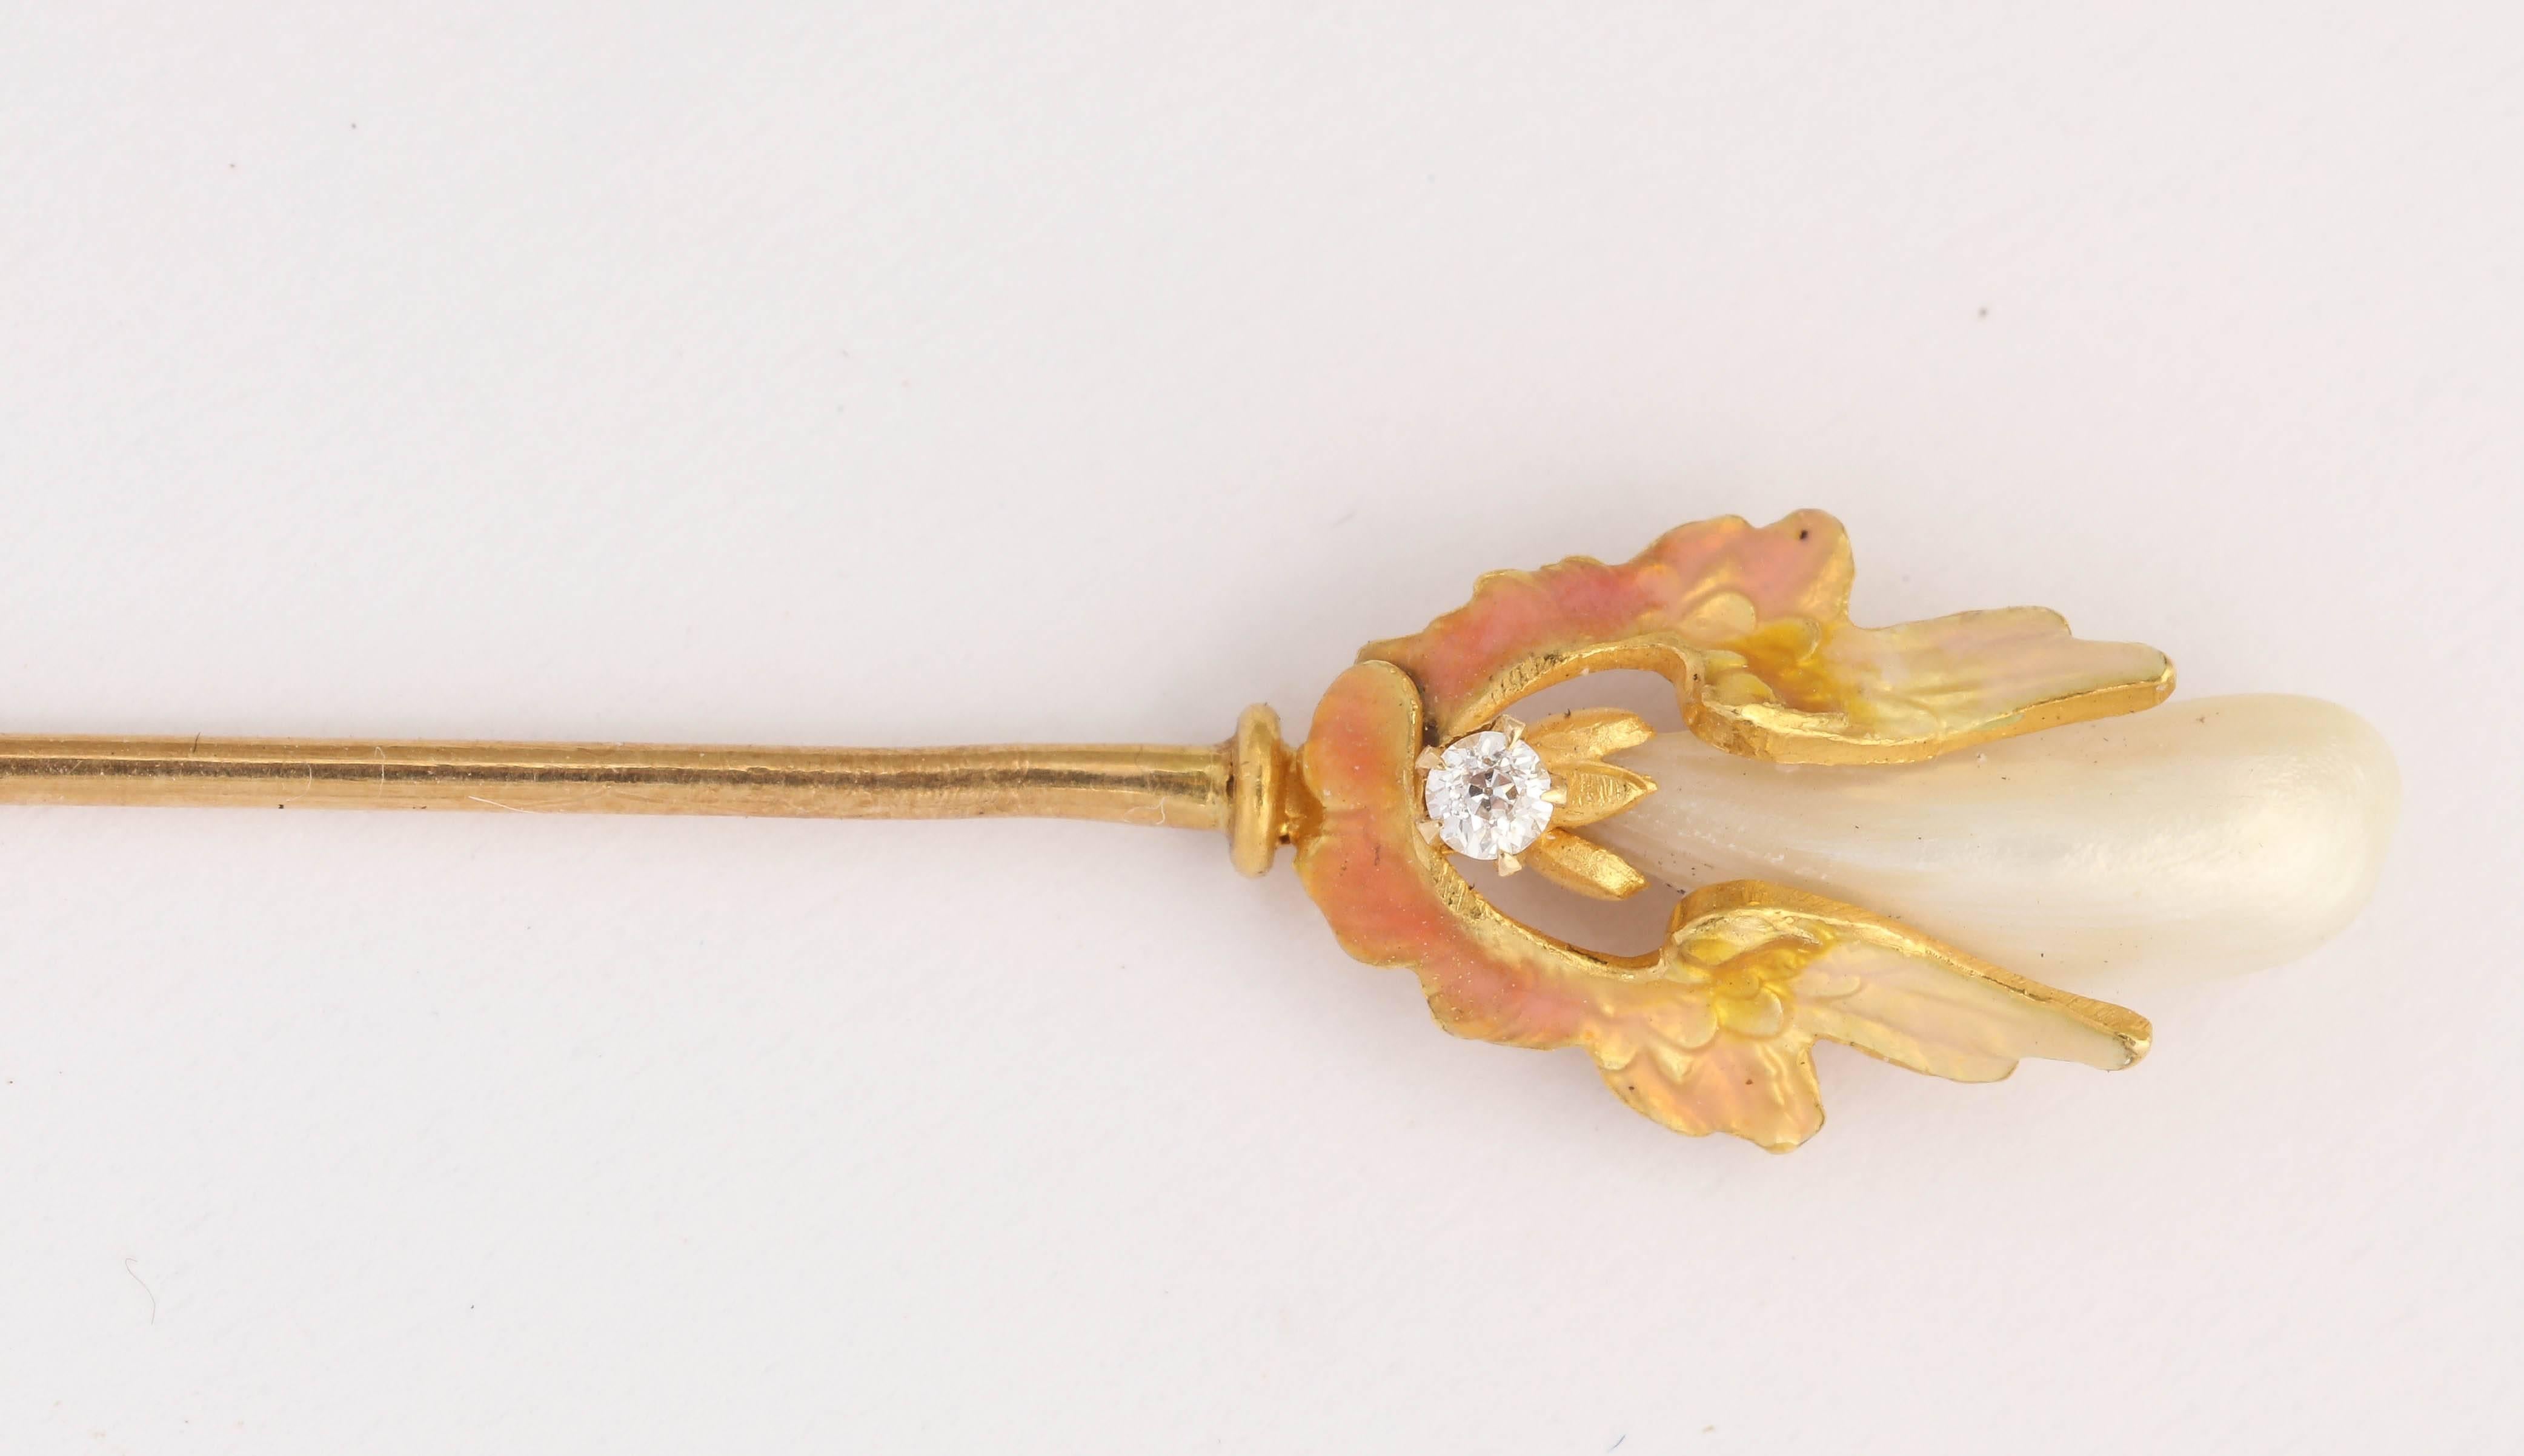 This hundred year old stick pin must have seen some great parties in it's day. There are stamps on it attributed to Krementz. The leaves are a beautiful peach color enamel, with a bezel set diamond and a Mississippi river pearls.